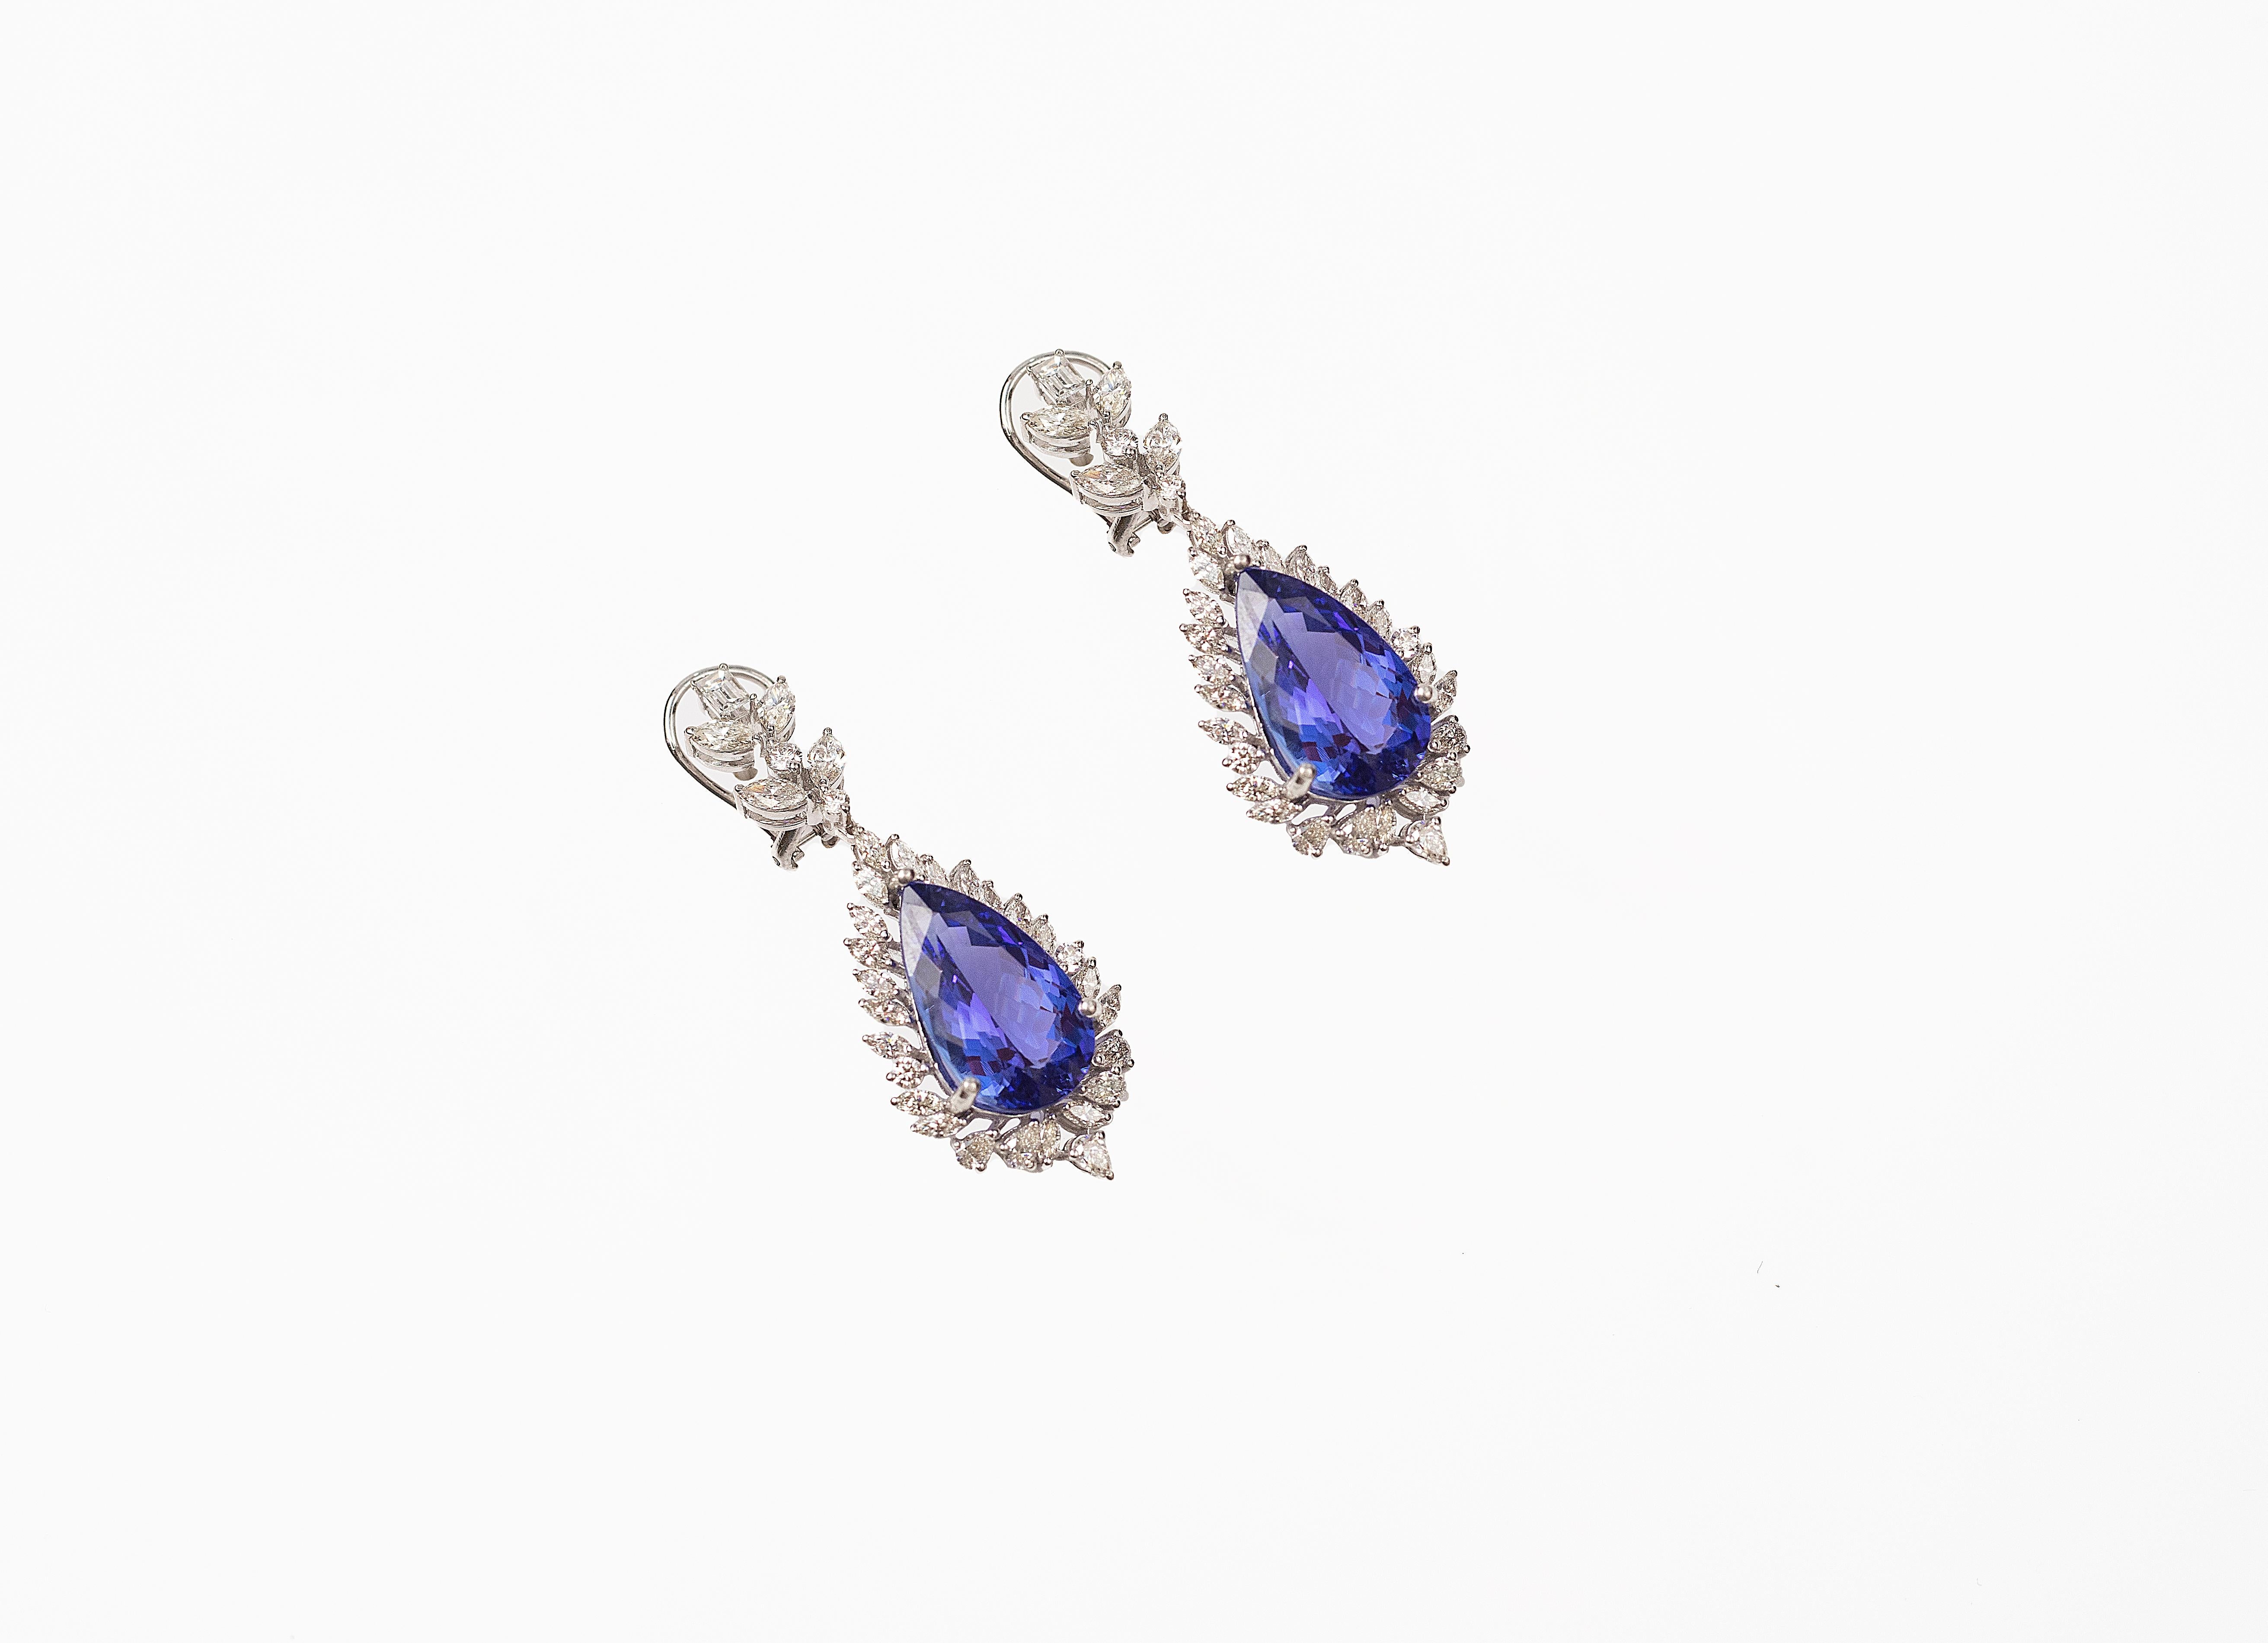 Handcrafted Dangling Earring in 18k Gold Studded with Natural Fancy Shape Diamonds and Natural Pear Shape Tanzanite.
Gold Weight - 12.649 gms

Diamond Clarity - VS
Diamond Colour - H

Pear Shape Natural Tanzanite - 18.87 cts

Post and Clip System